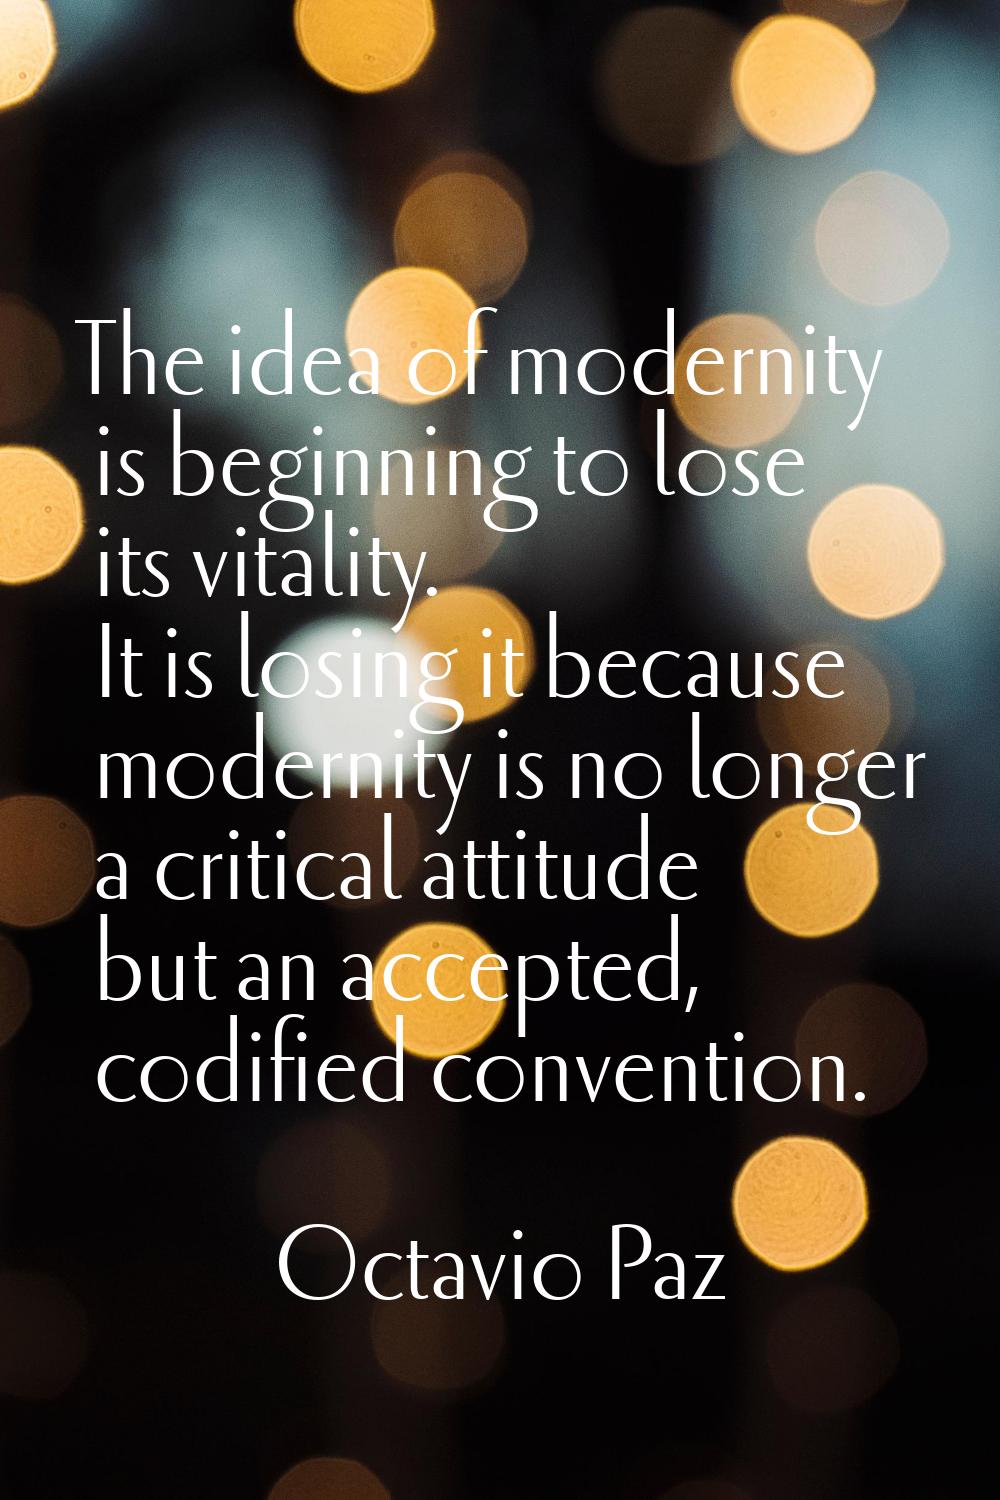 The idea of modernity is beginning to lose its vitality. It is losing it because modernity is no lo